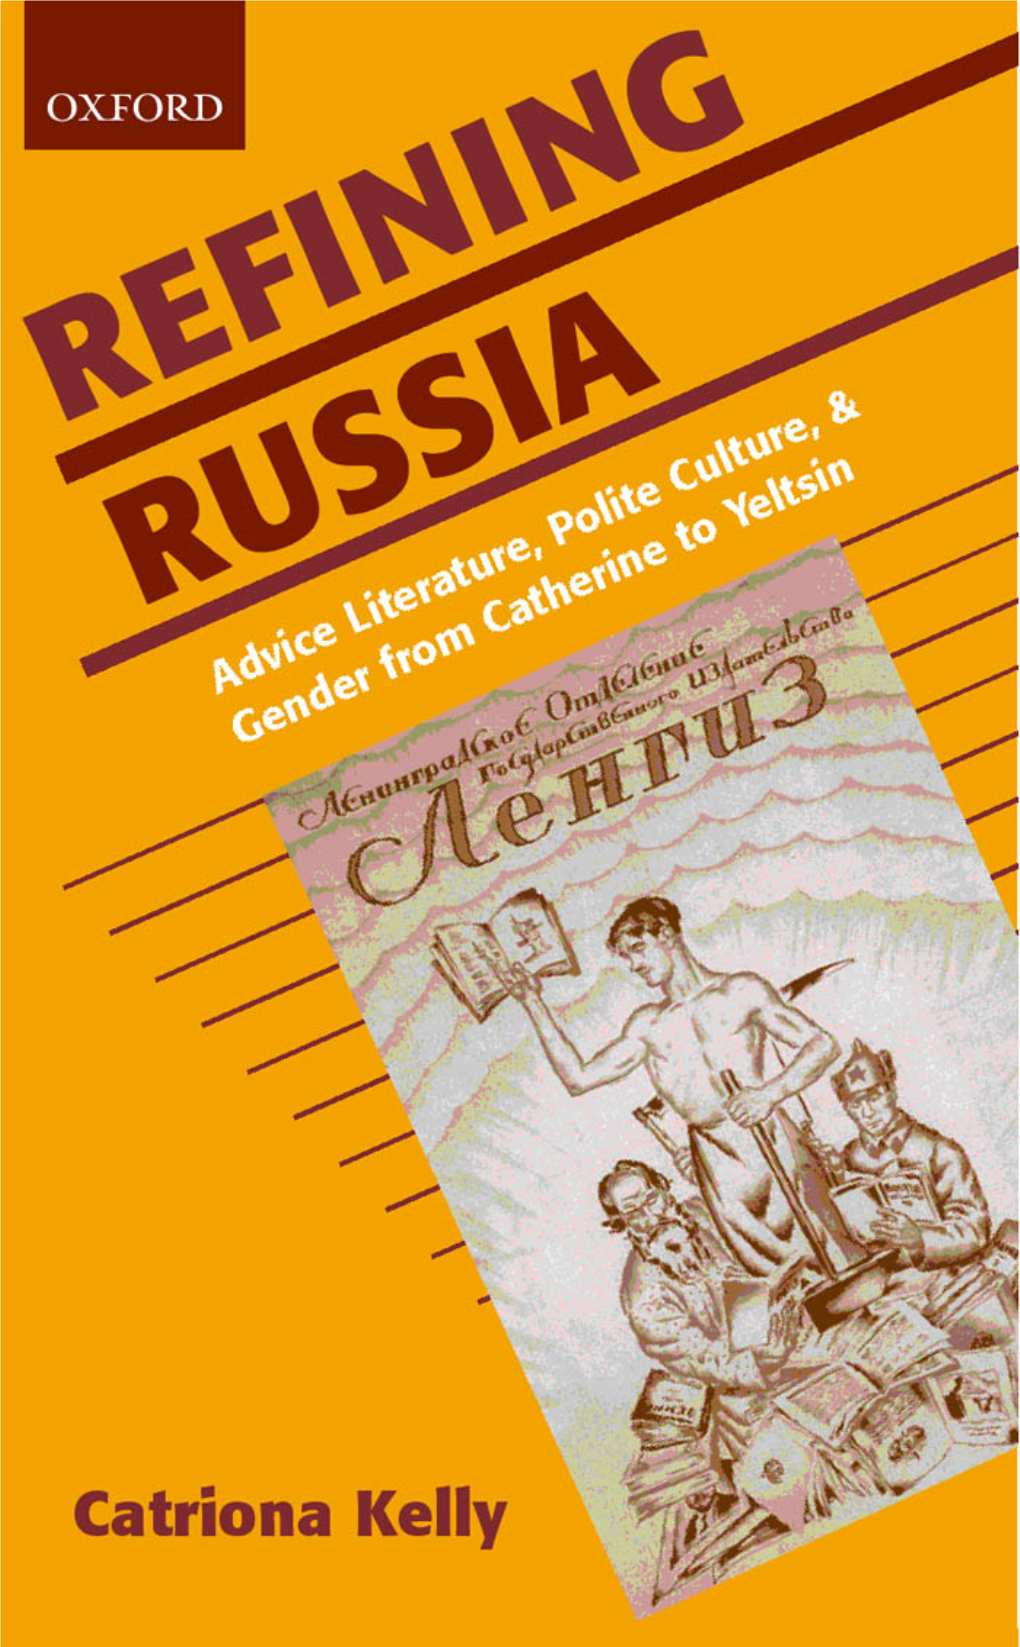 Refining Russia : Advice Literature, Polite Culture, and Gender from Catherine to Yeltsin